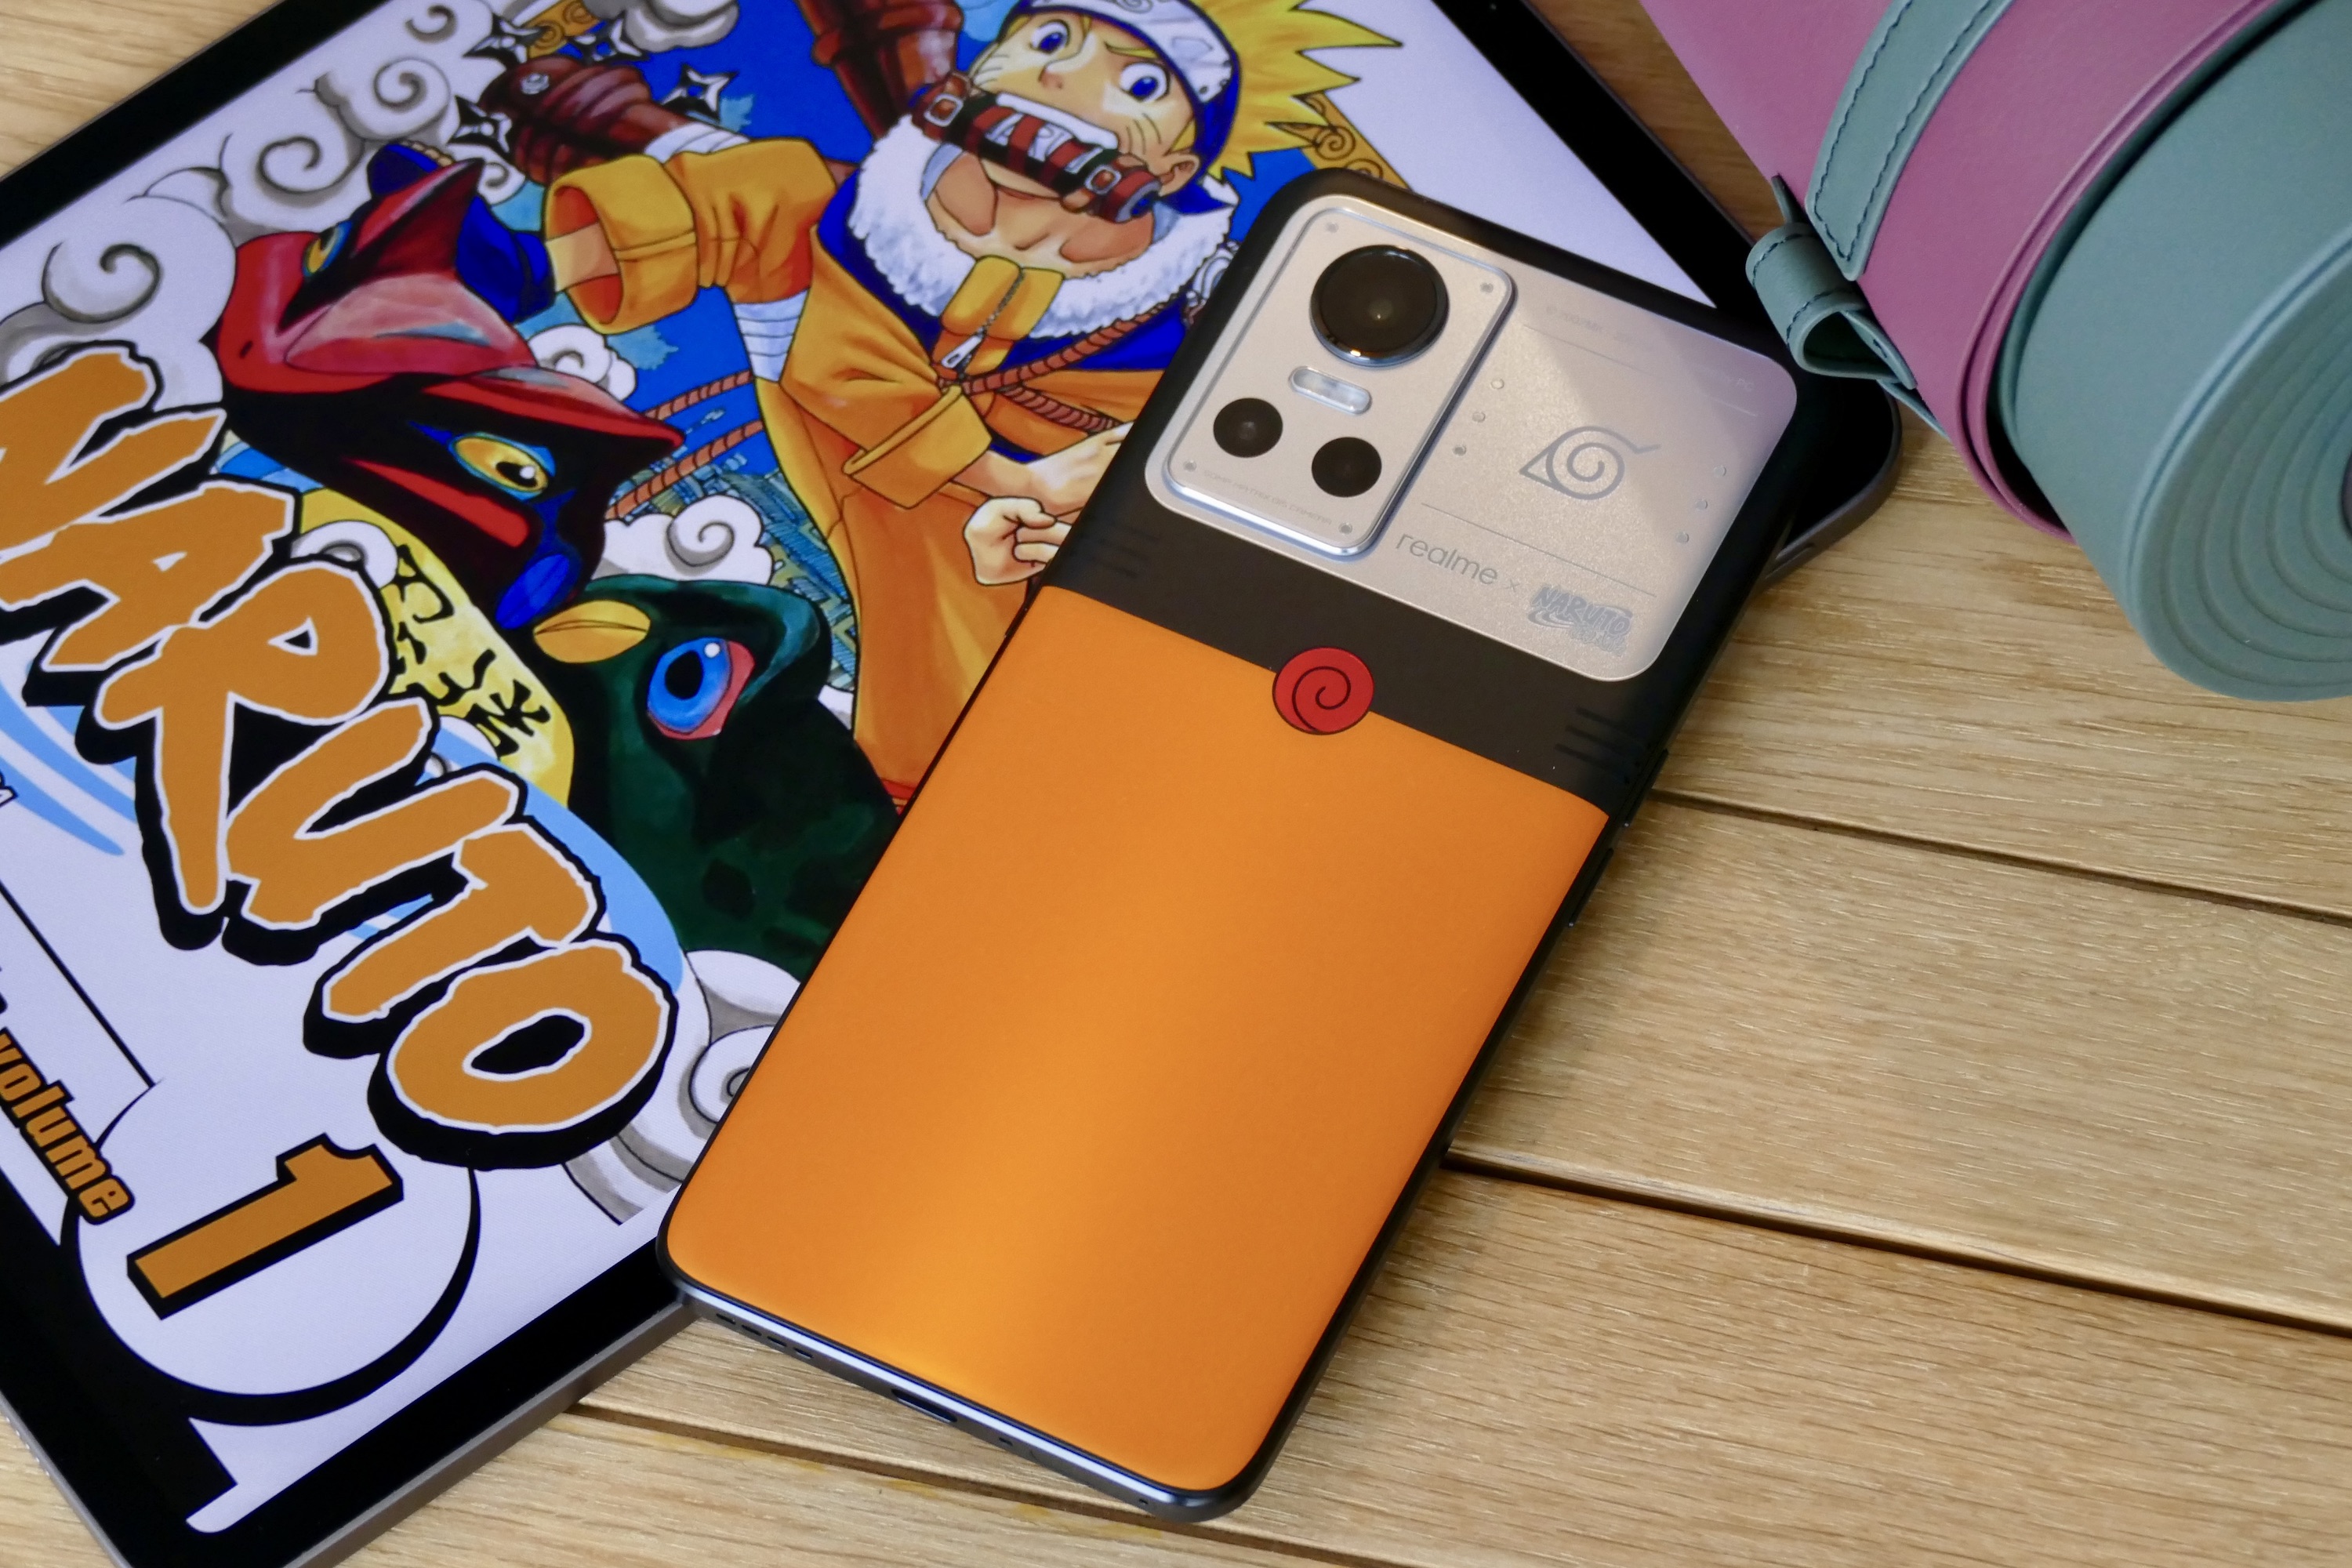 Realme's Naruto special edition phone is absolutely glorious